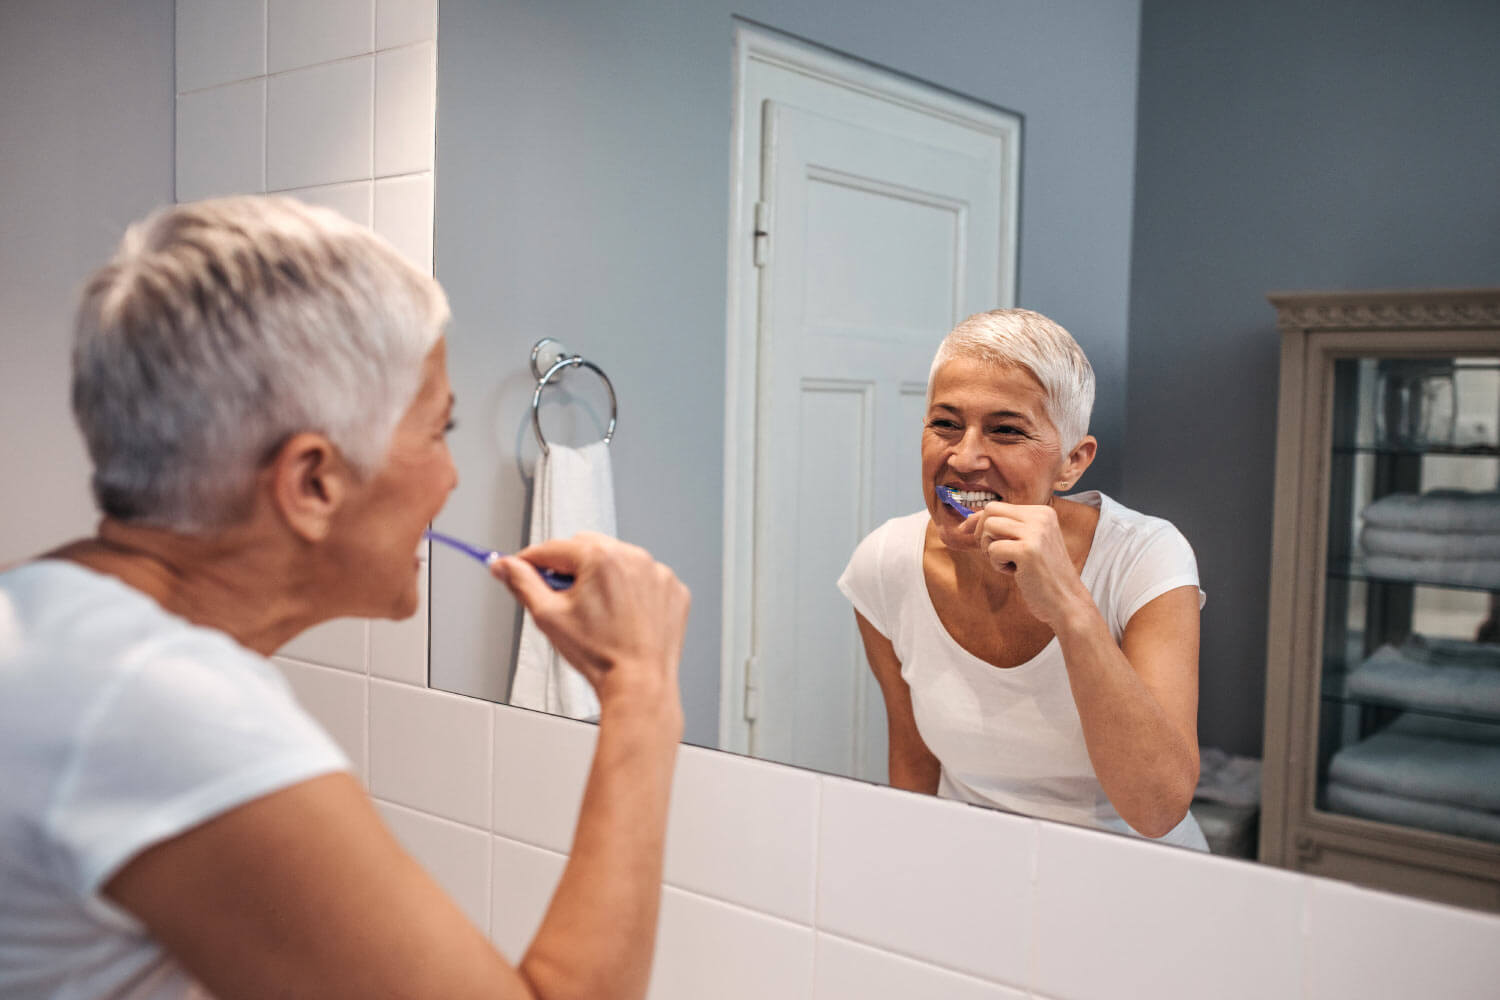 Woman with short white hair sticks to her oral hygiene routine and brushes her teeth